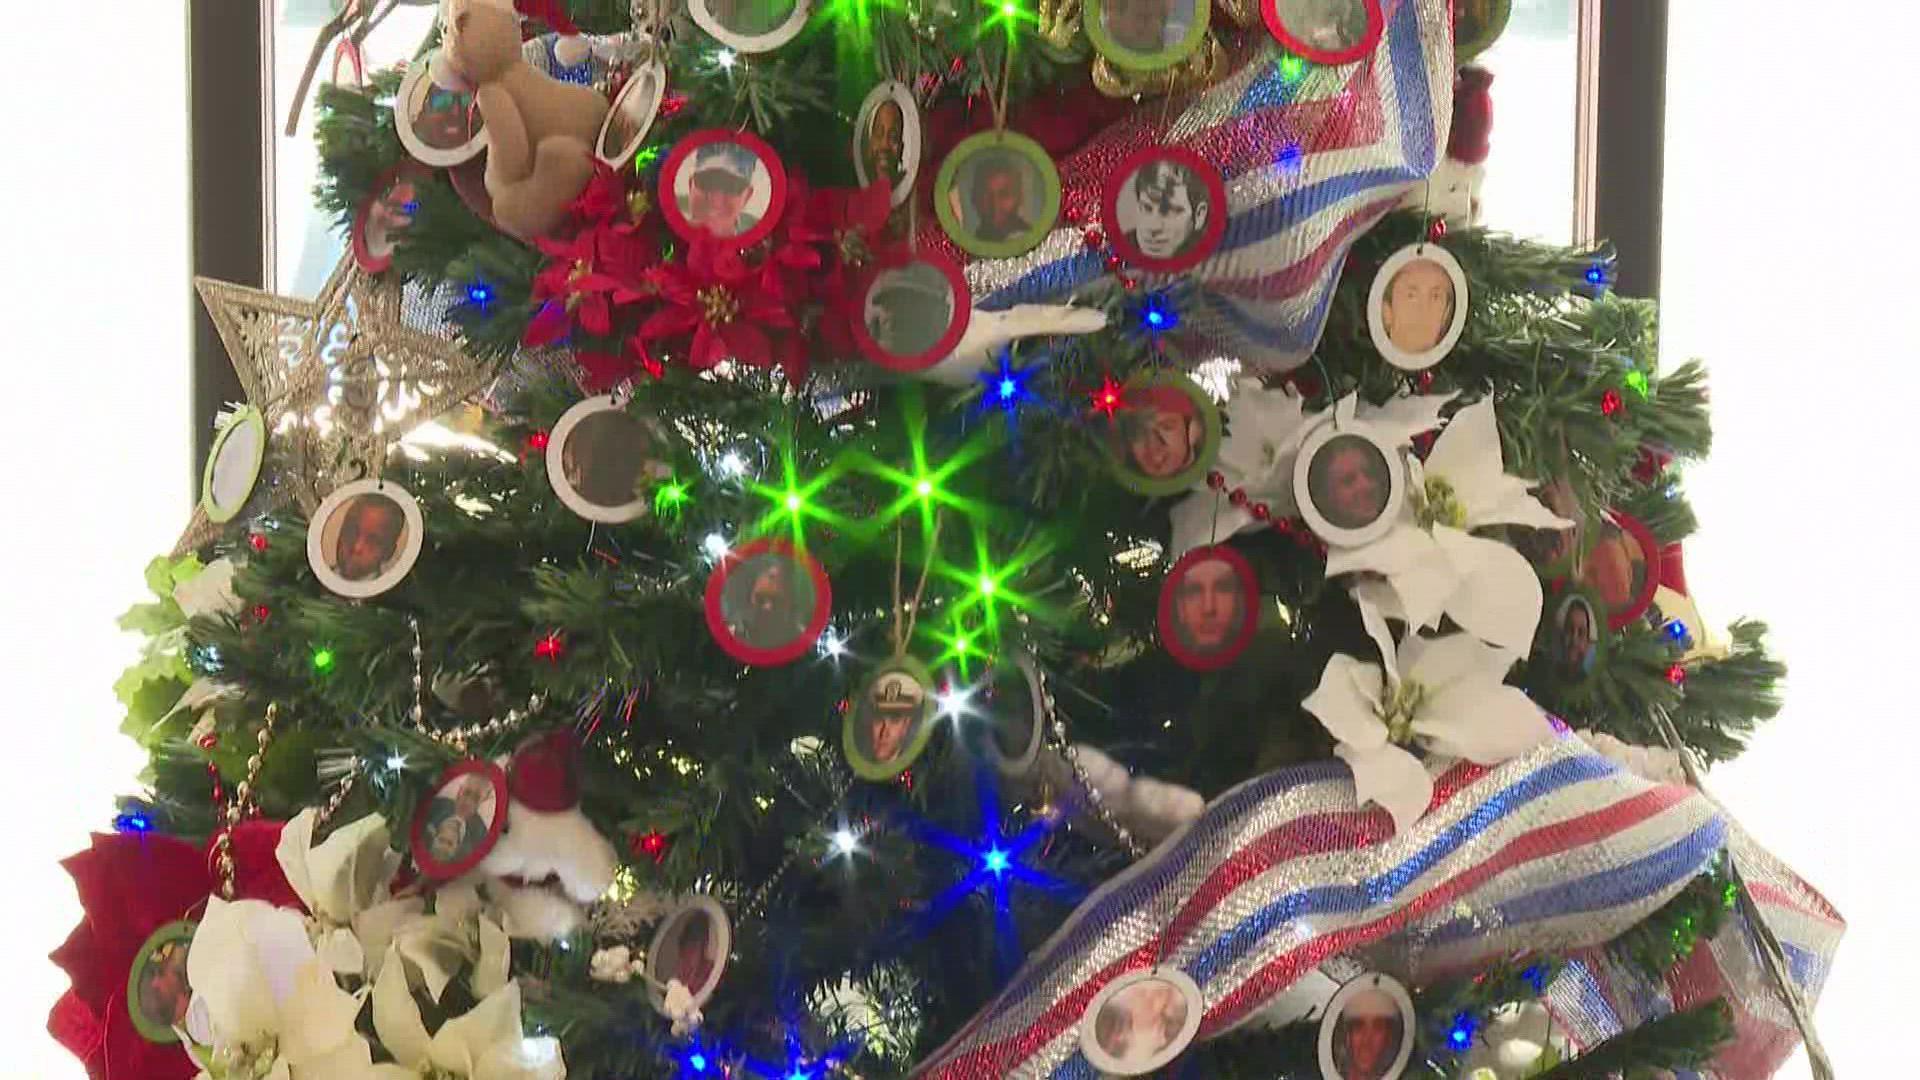 NAS JAX will decorate the tree with photo ornaments of 70 fallen service members.